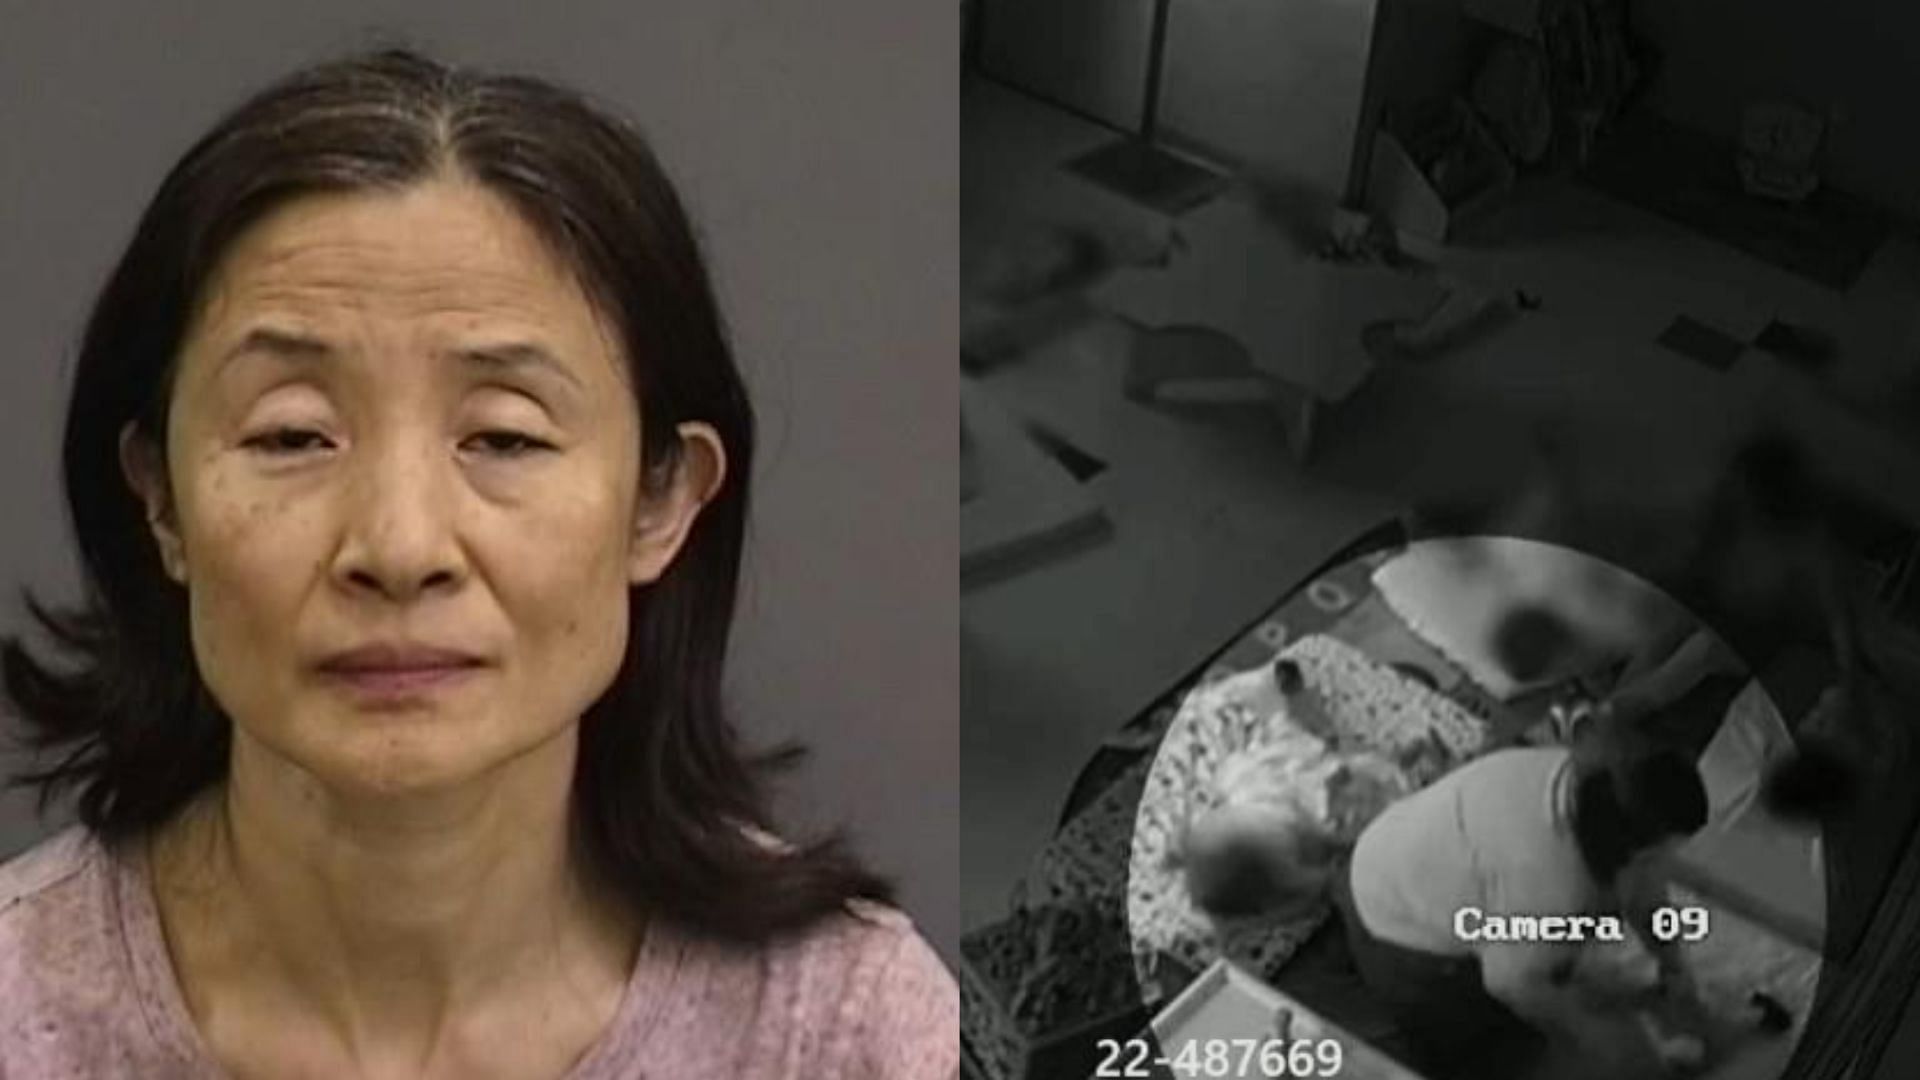 Co-owner and a worker of a daycare in Odessa were charged with child abuse following the release of a surveillance video (Images via Hillsborough County Sheriff